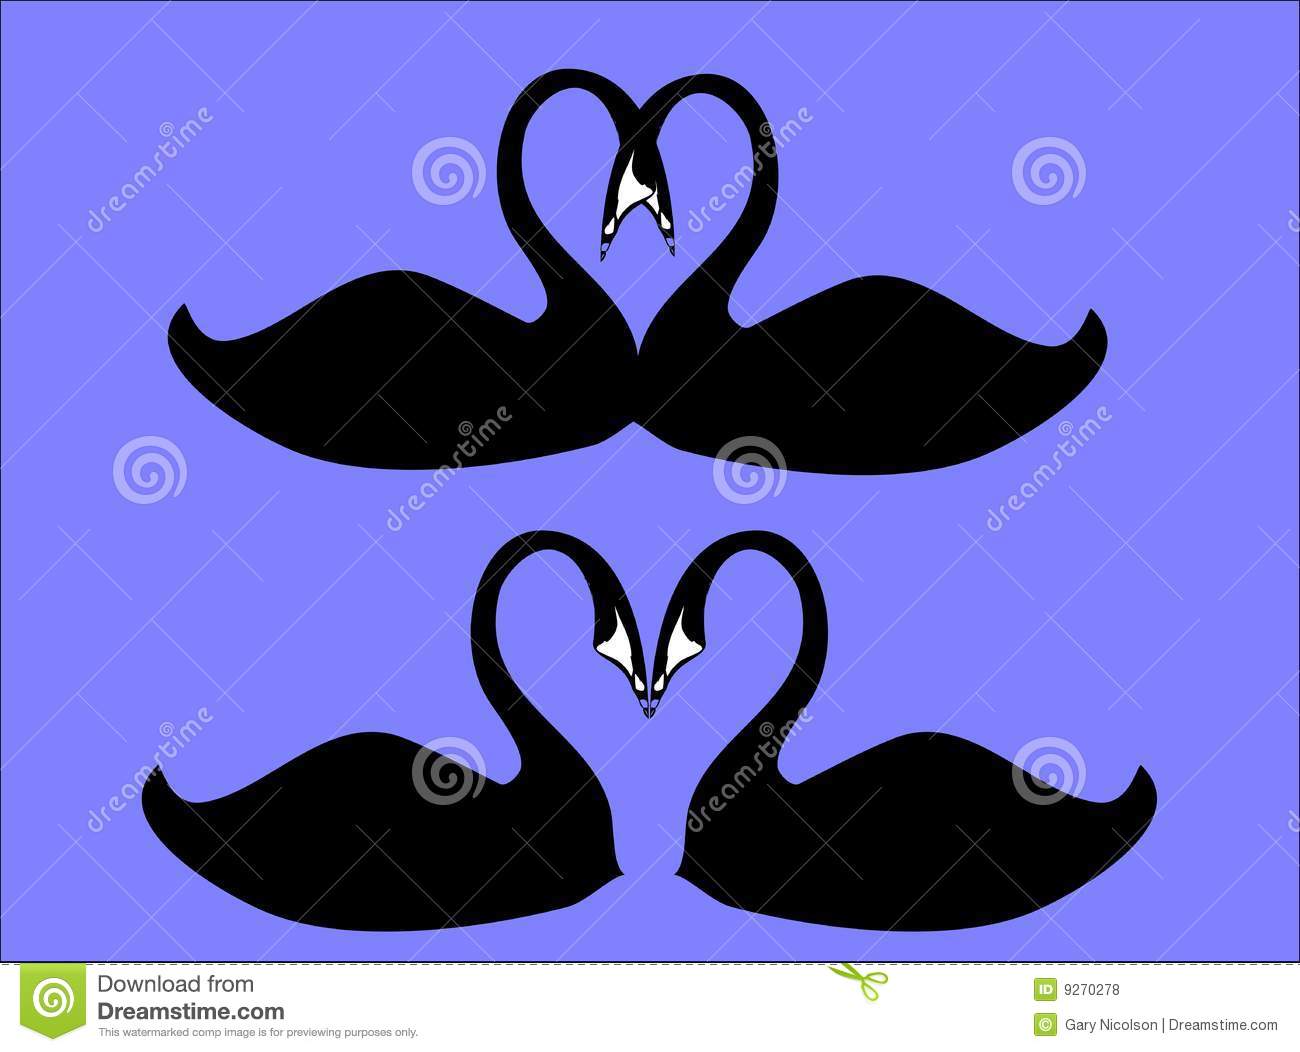 Swans Kissing On Blue Royalty Free Stock Photos   Image  9270278